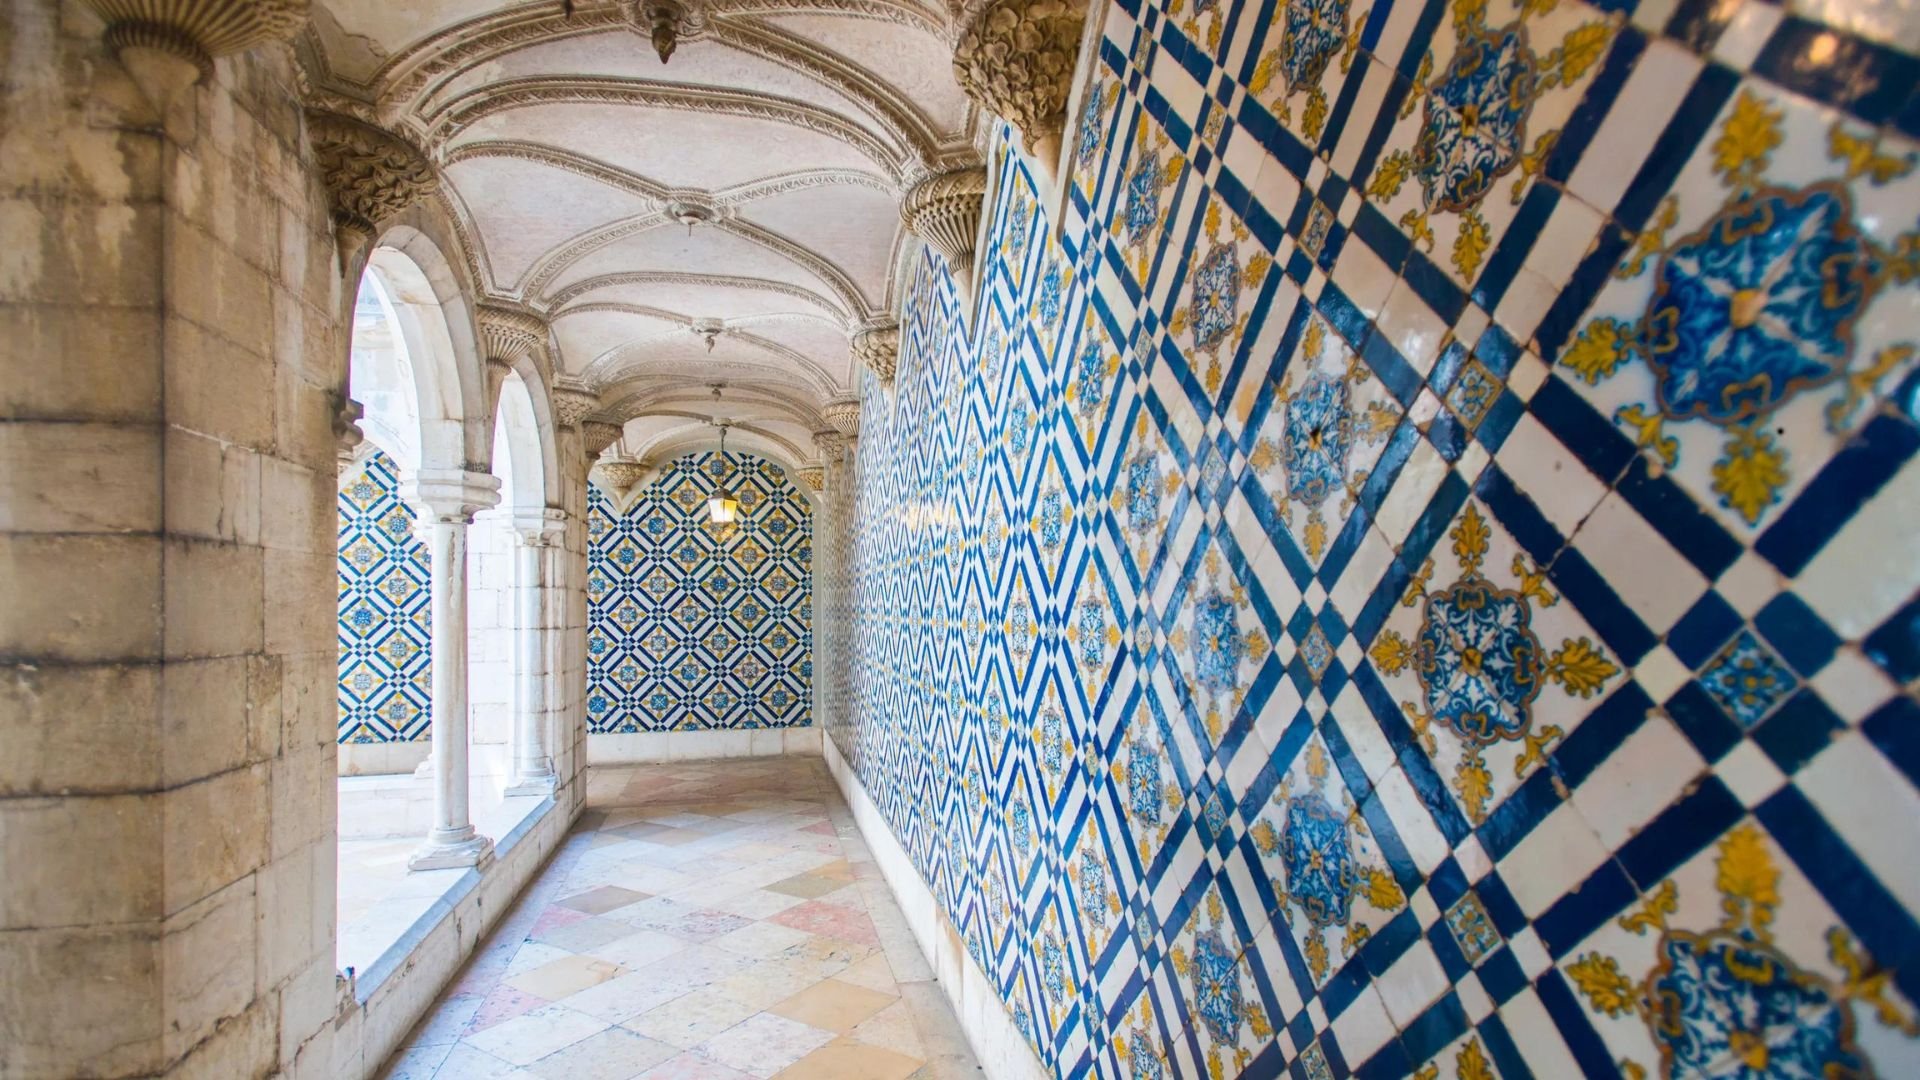 Interior of The National Tile Museum in Lisbon, Portugal, featuring intricate and beautifully designed ceramic tile displays that showcase the rich history of tile artistry in Portugal.